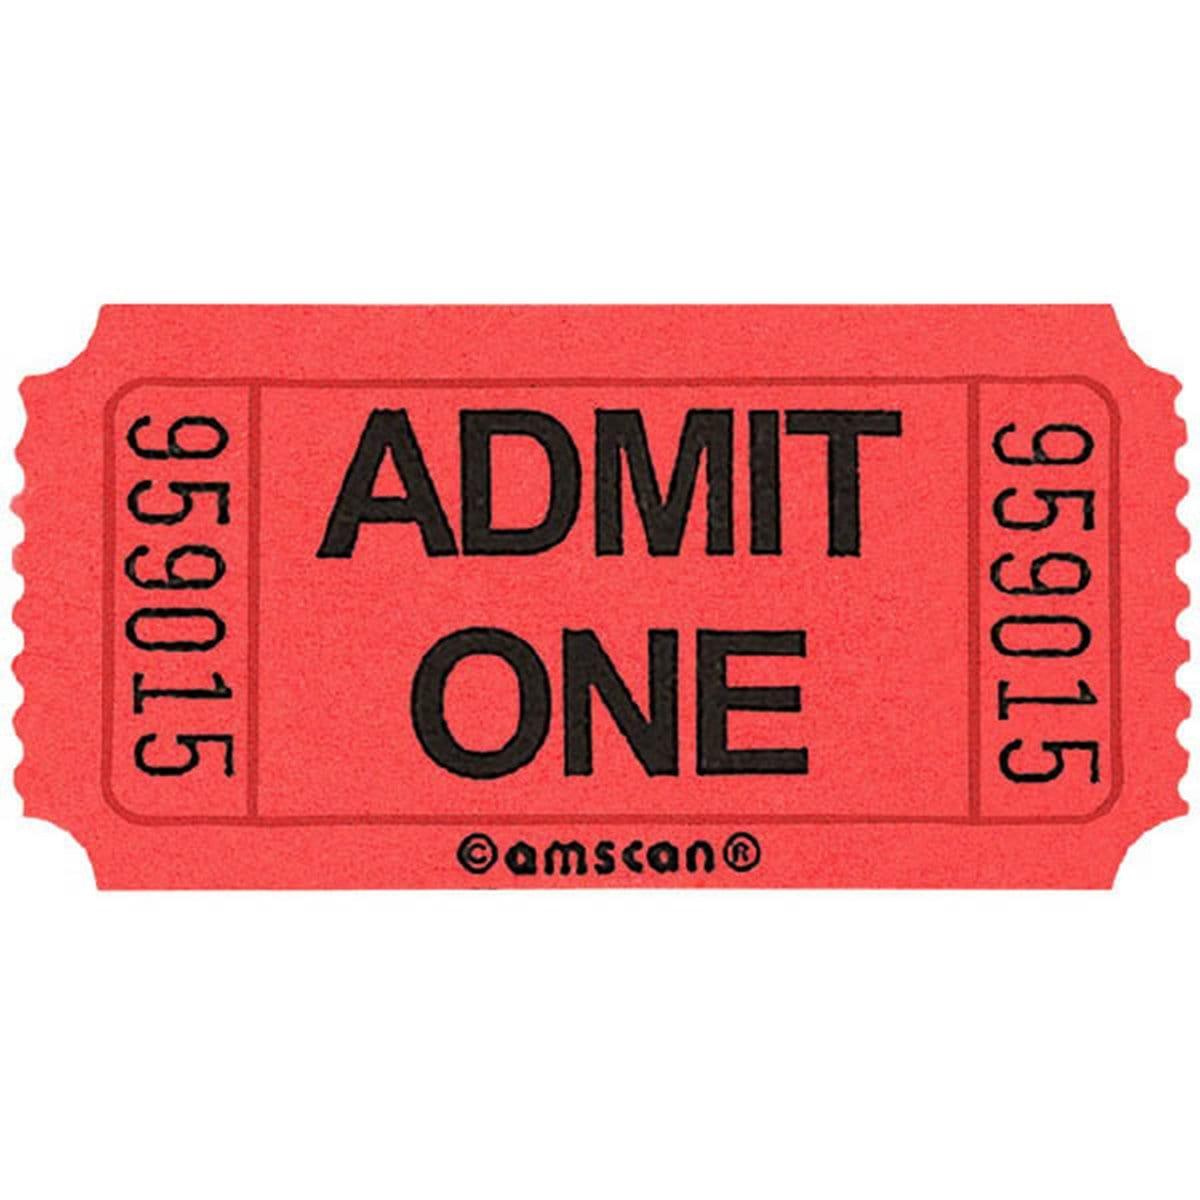 Buy Party Supplies Single Ticket Roll 2000/pkg - Red sold at Party Expert